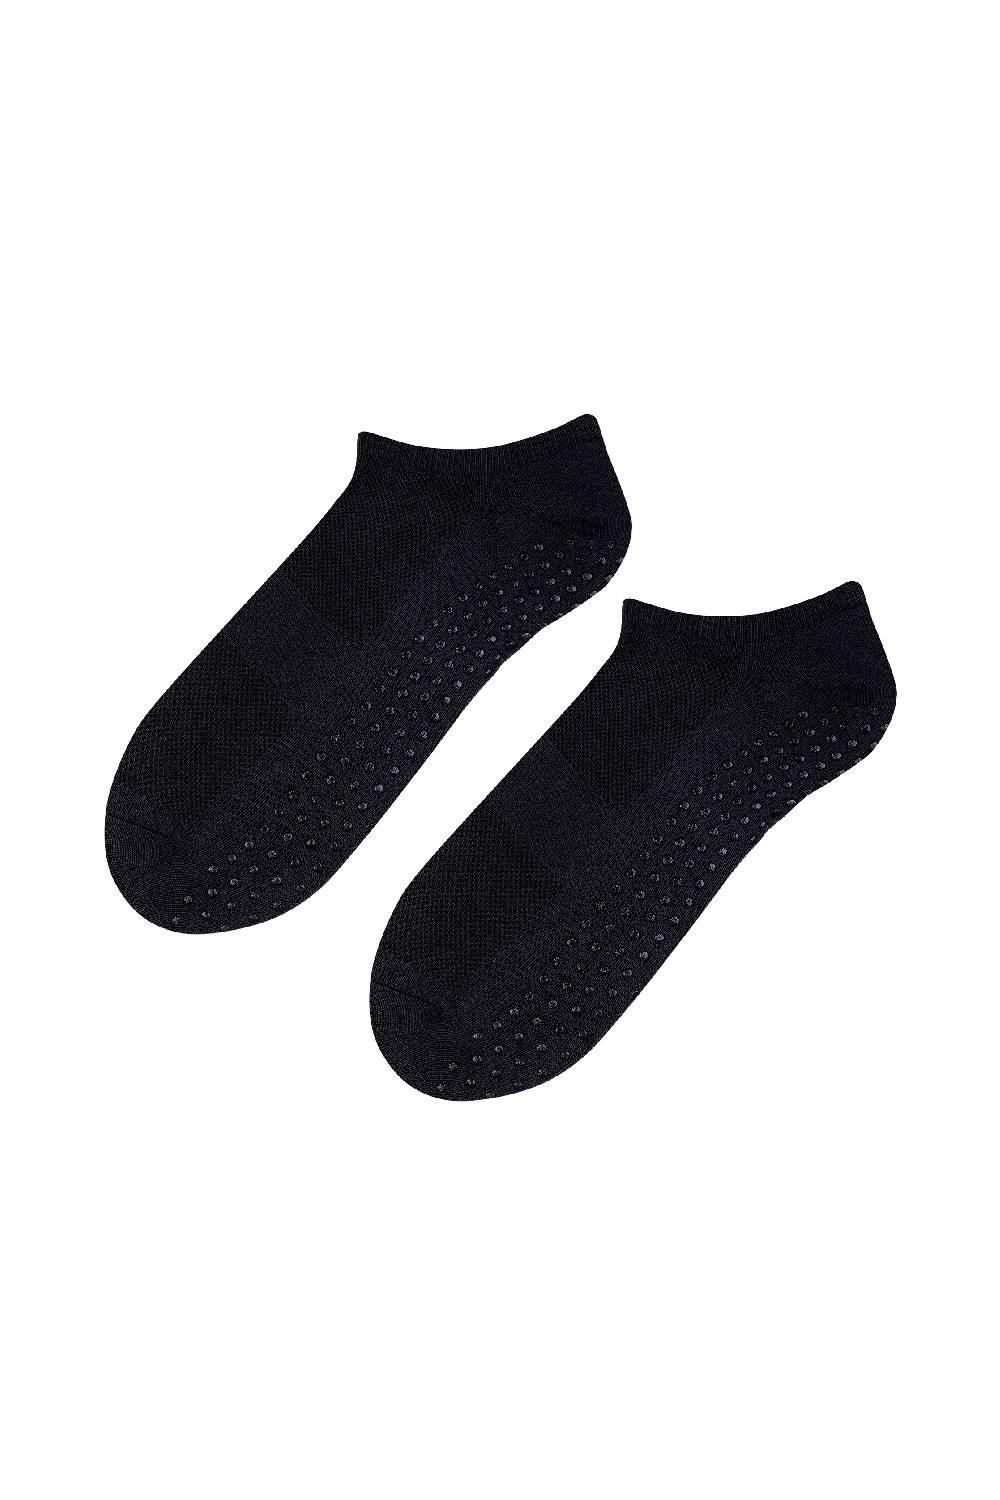 Non Slip Cotton No Show Low Cut Socks with Grips for Yoga & Pilates